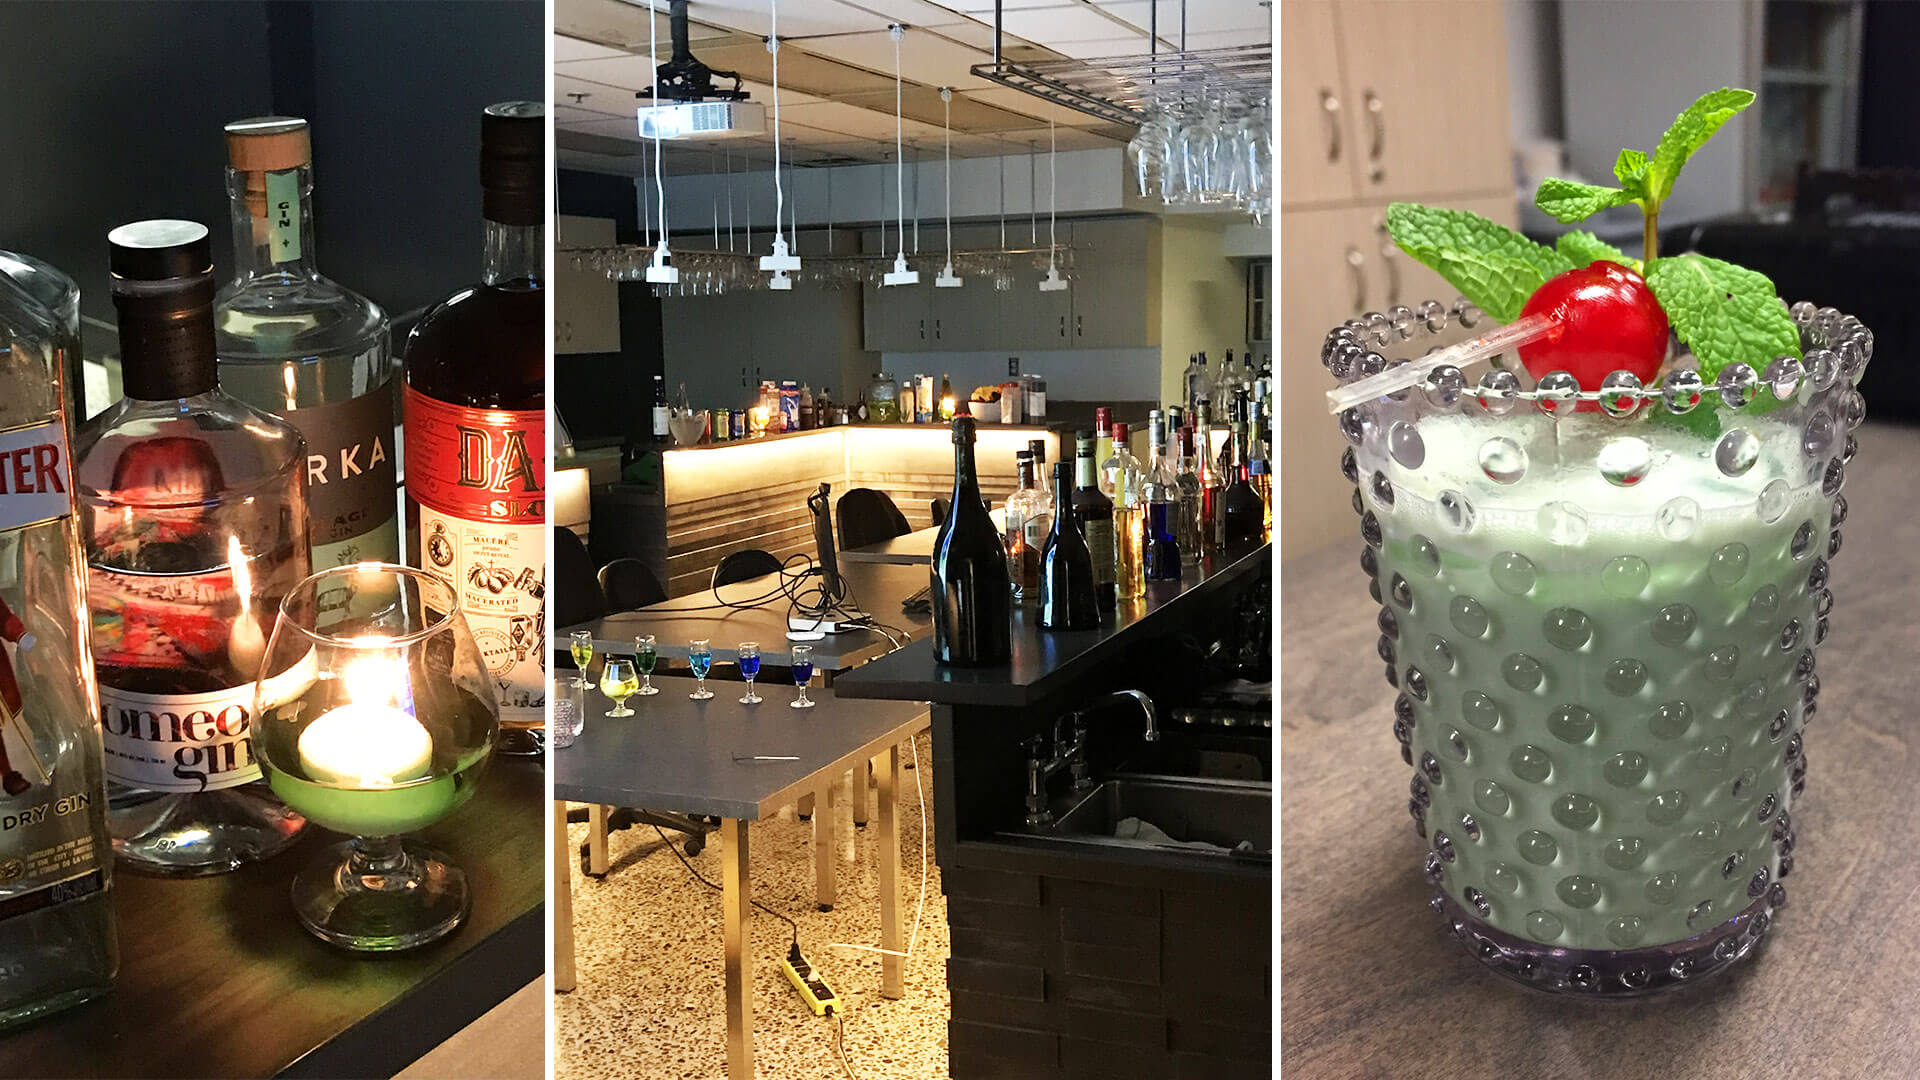 A collage displaying a bar's ambiance with images of liquor bottles, a dimly lit bar area with hanging glasses, and a close-up of a cocktail.